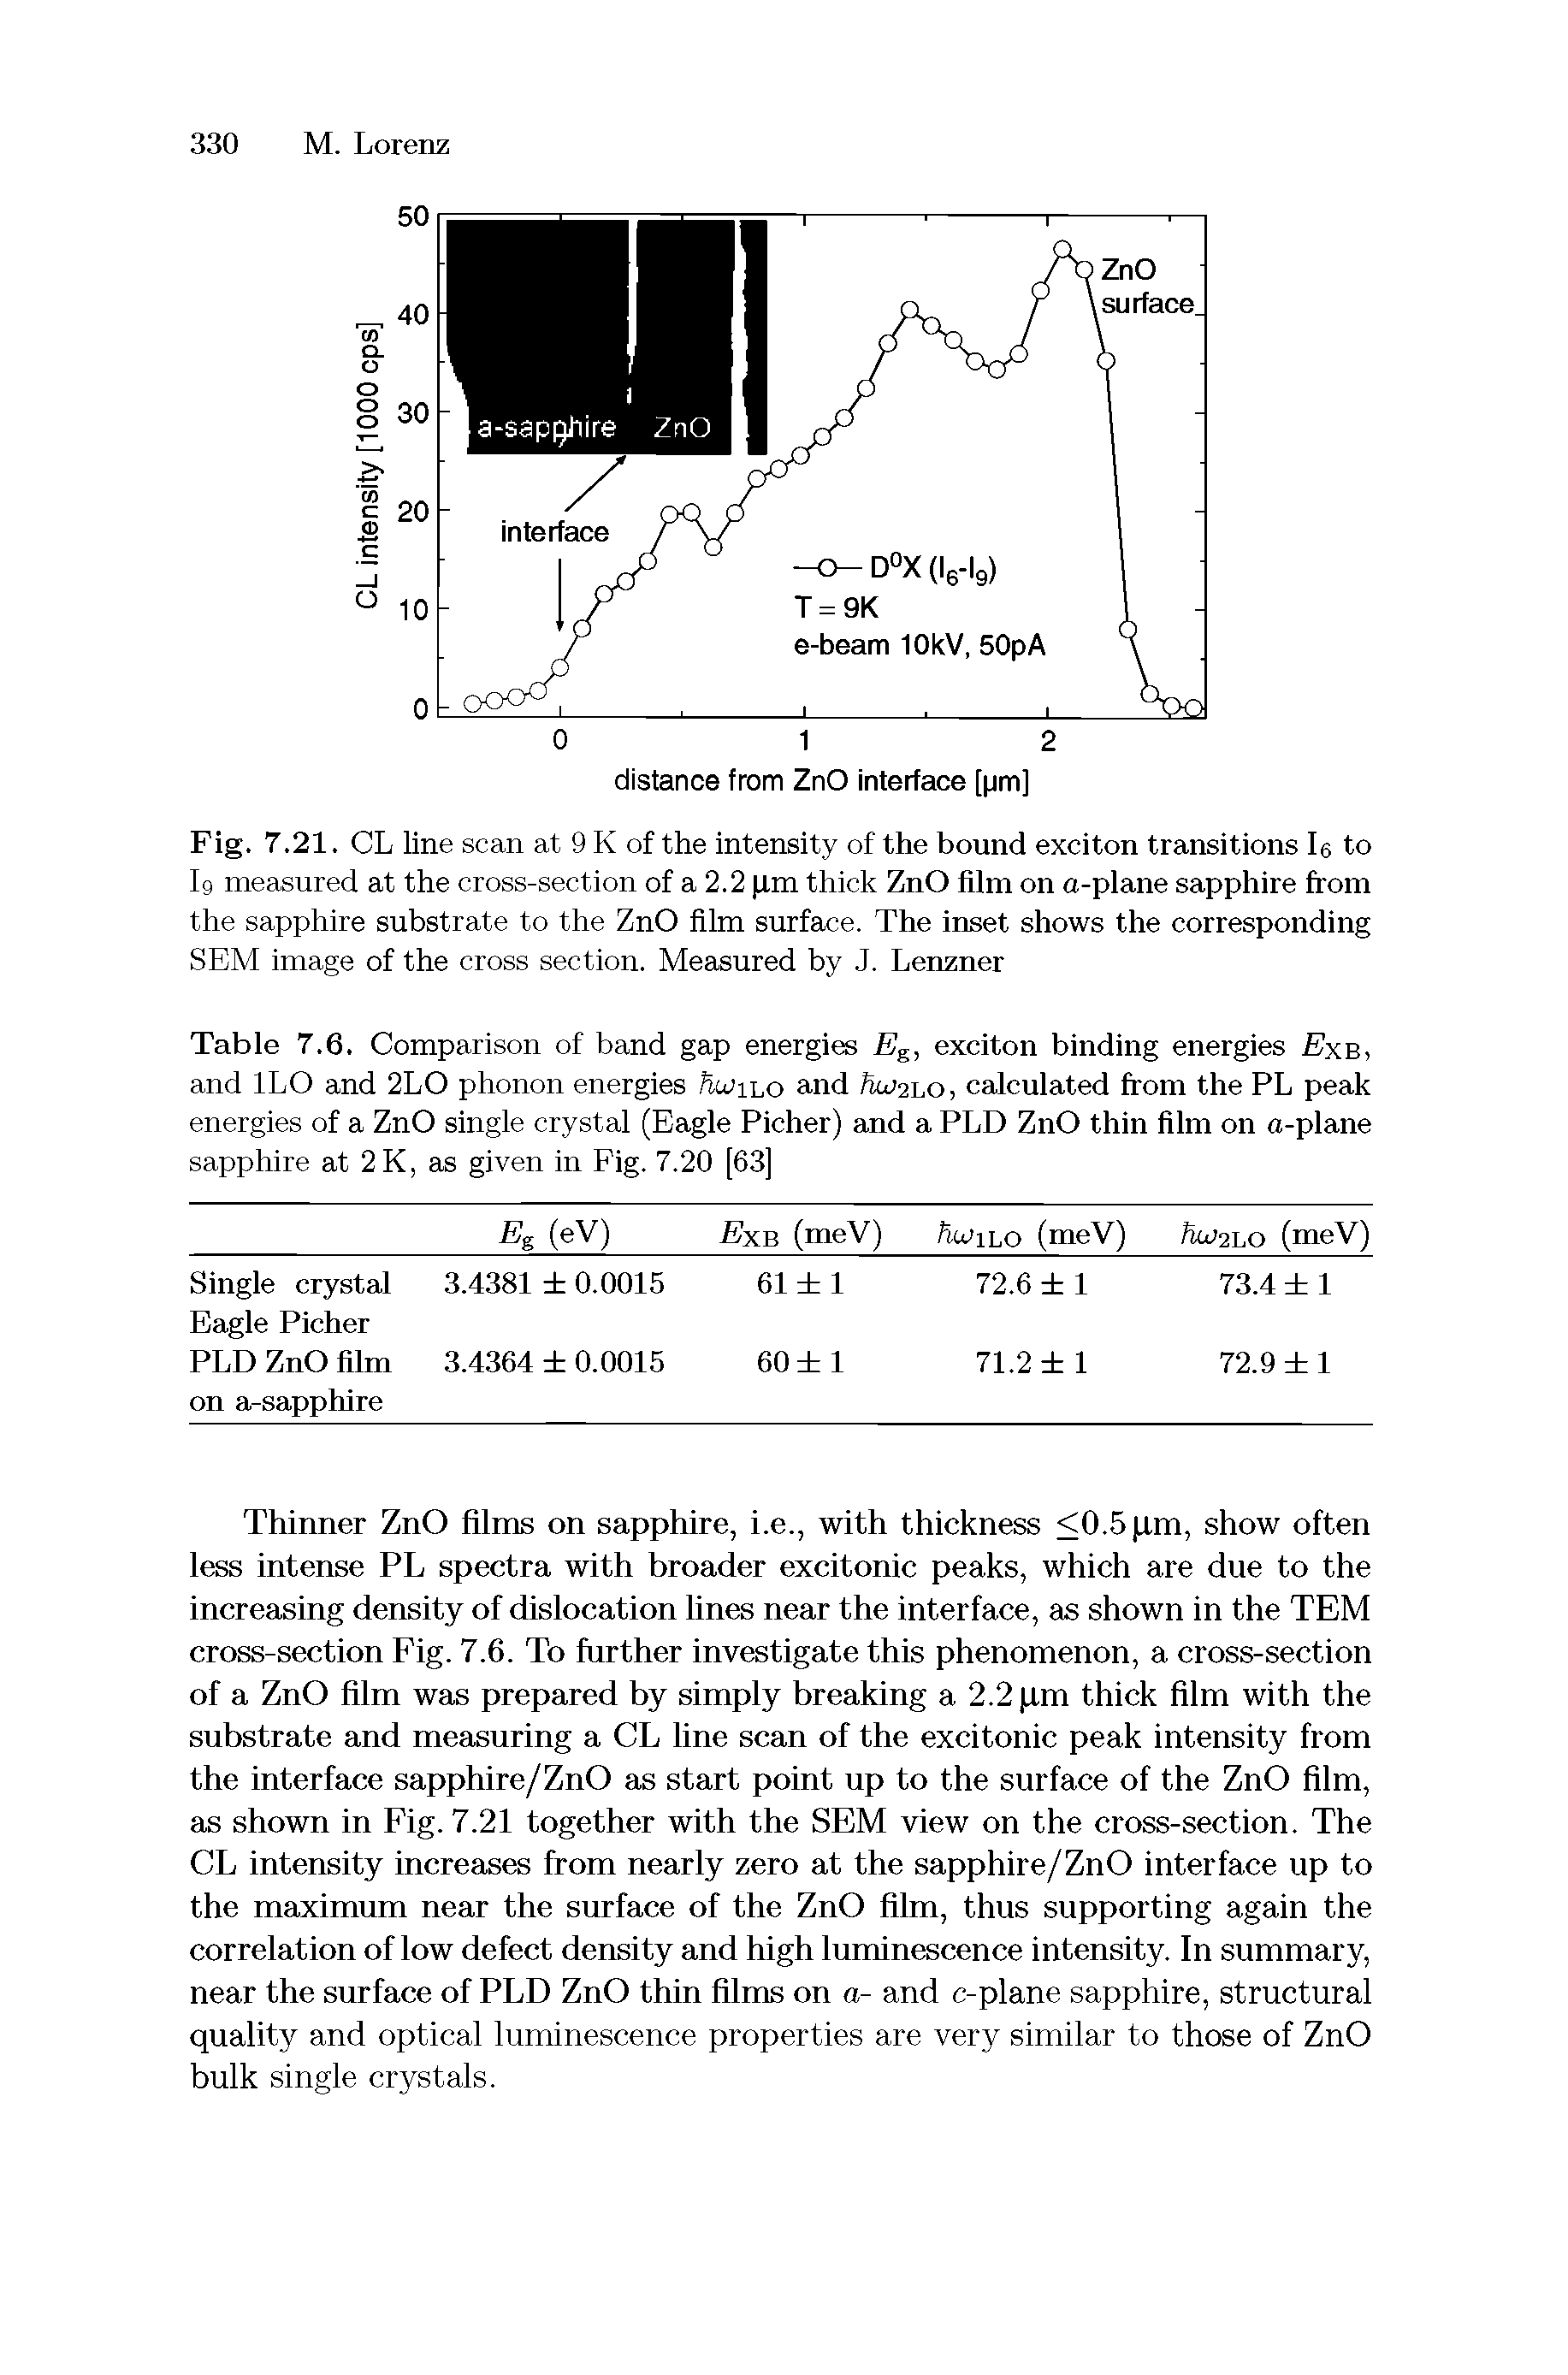 Fig. 7.21. CL line scan at 9 K of the intensity of the bound exciton transitions 16 to Ig measured at the cross-section of a 2.2 pm thick ZnO film on a-plane sapphire from the sapphire substrate to the ZnO film surface. The inset shows the corresponding SEM image of the cross section. Measured by J. Lenzner...